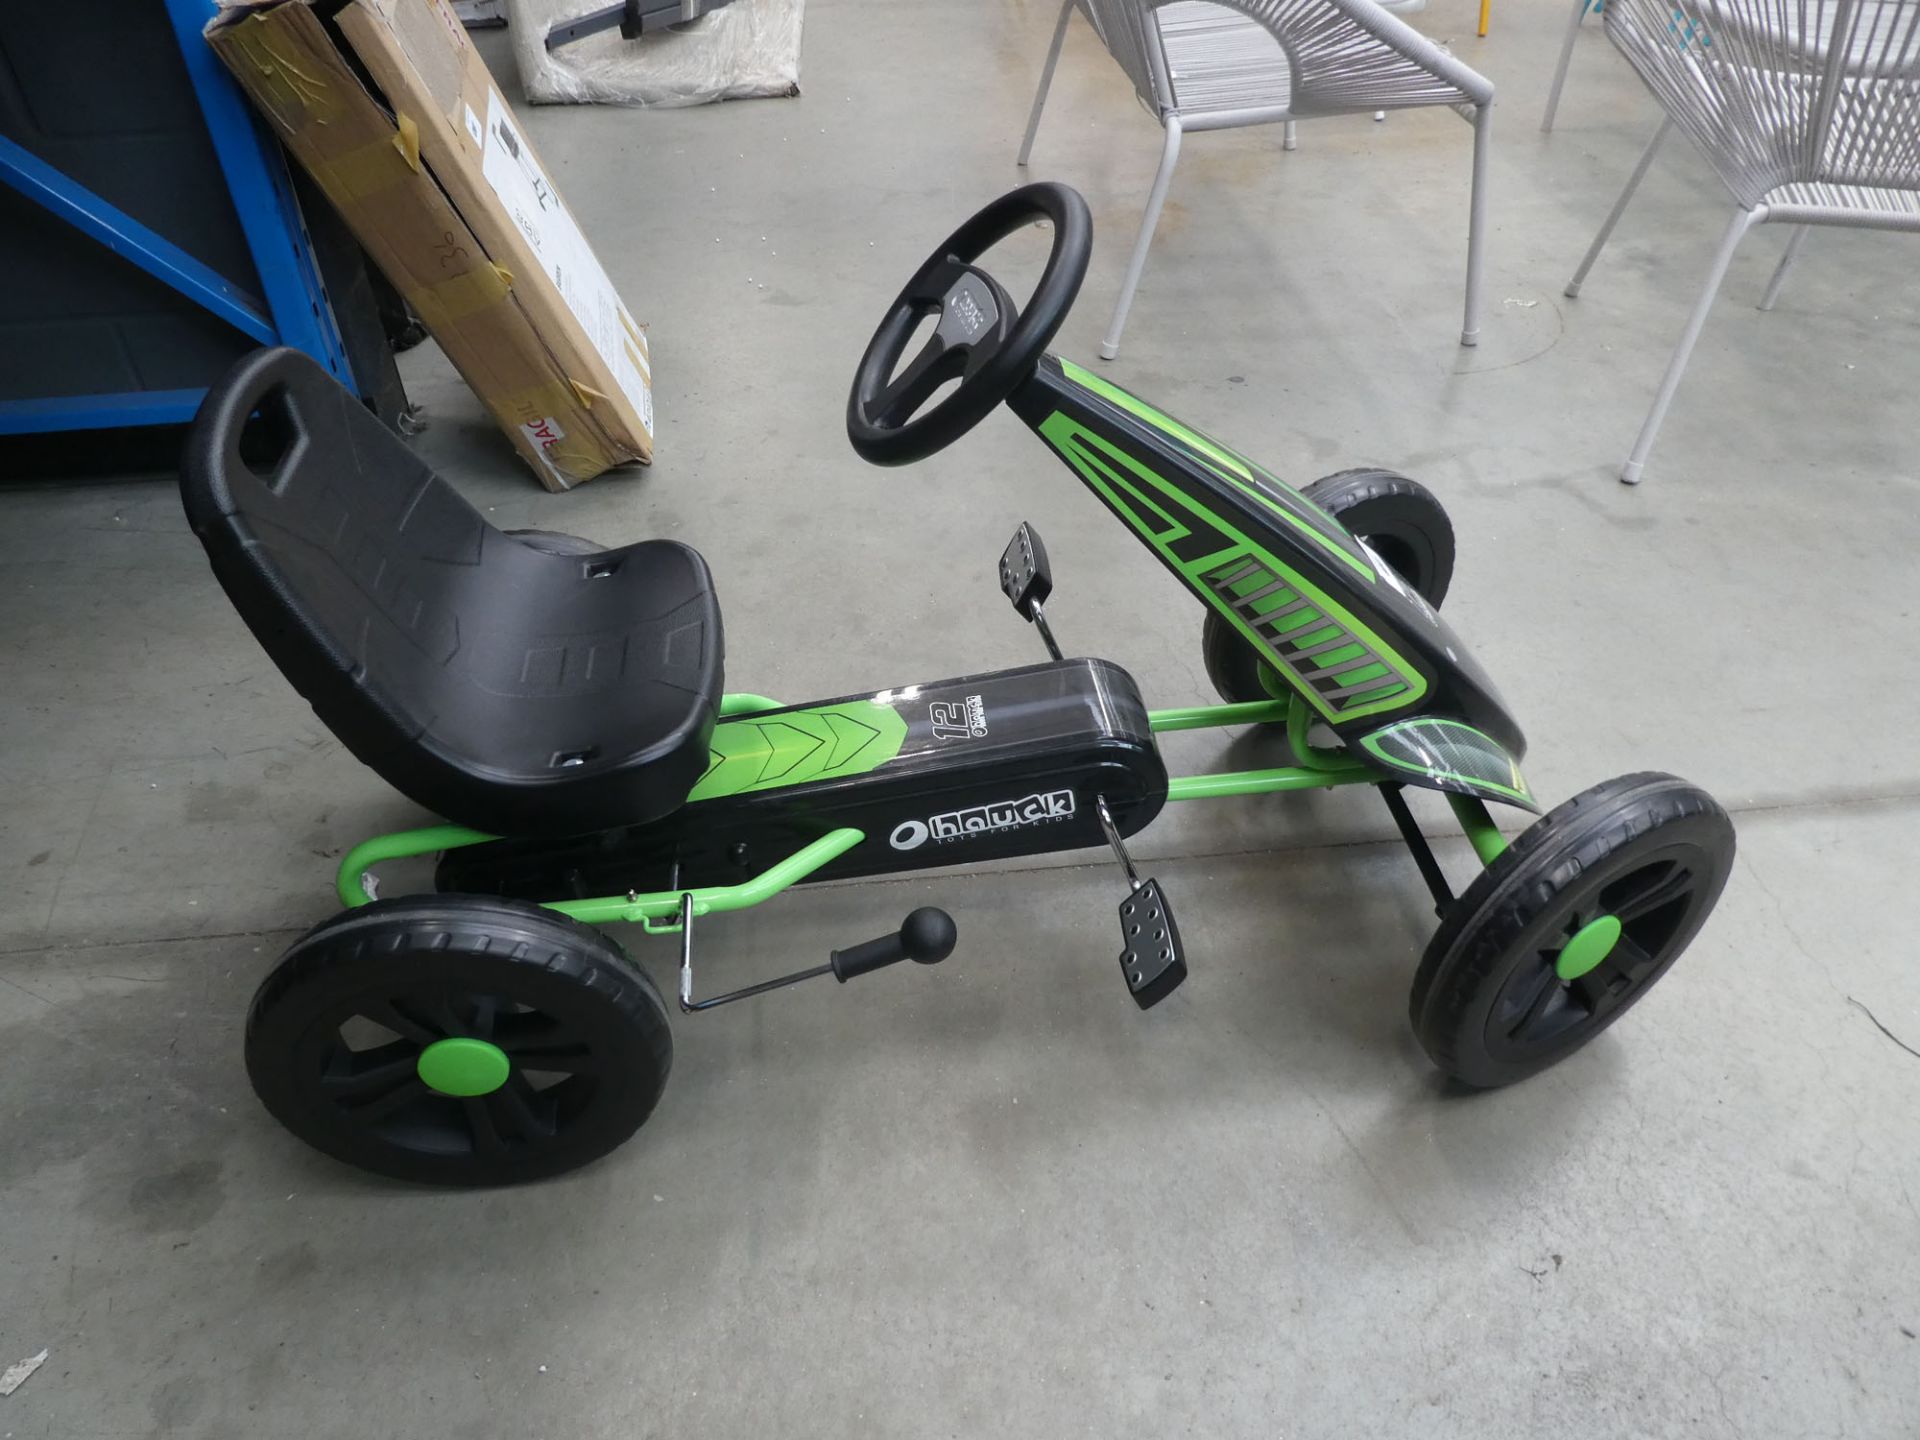 Hauck green and black pedal go kart - Image 2 of 2